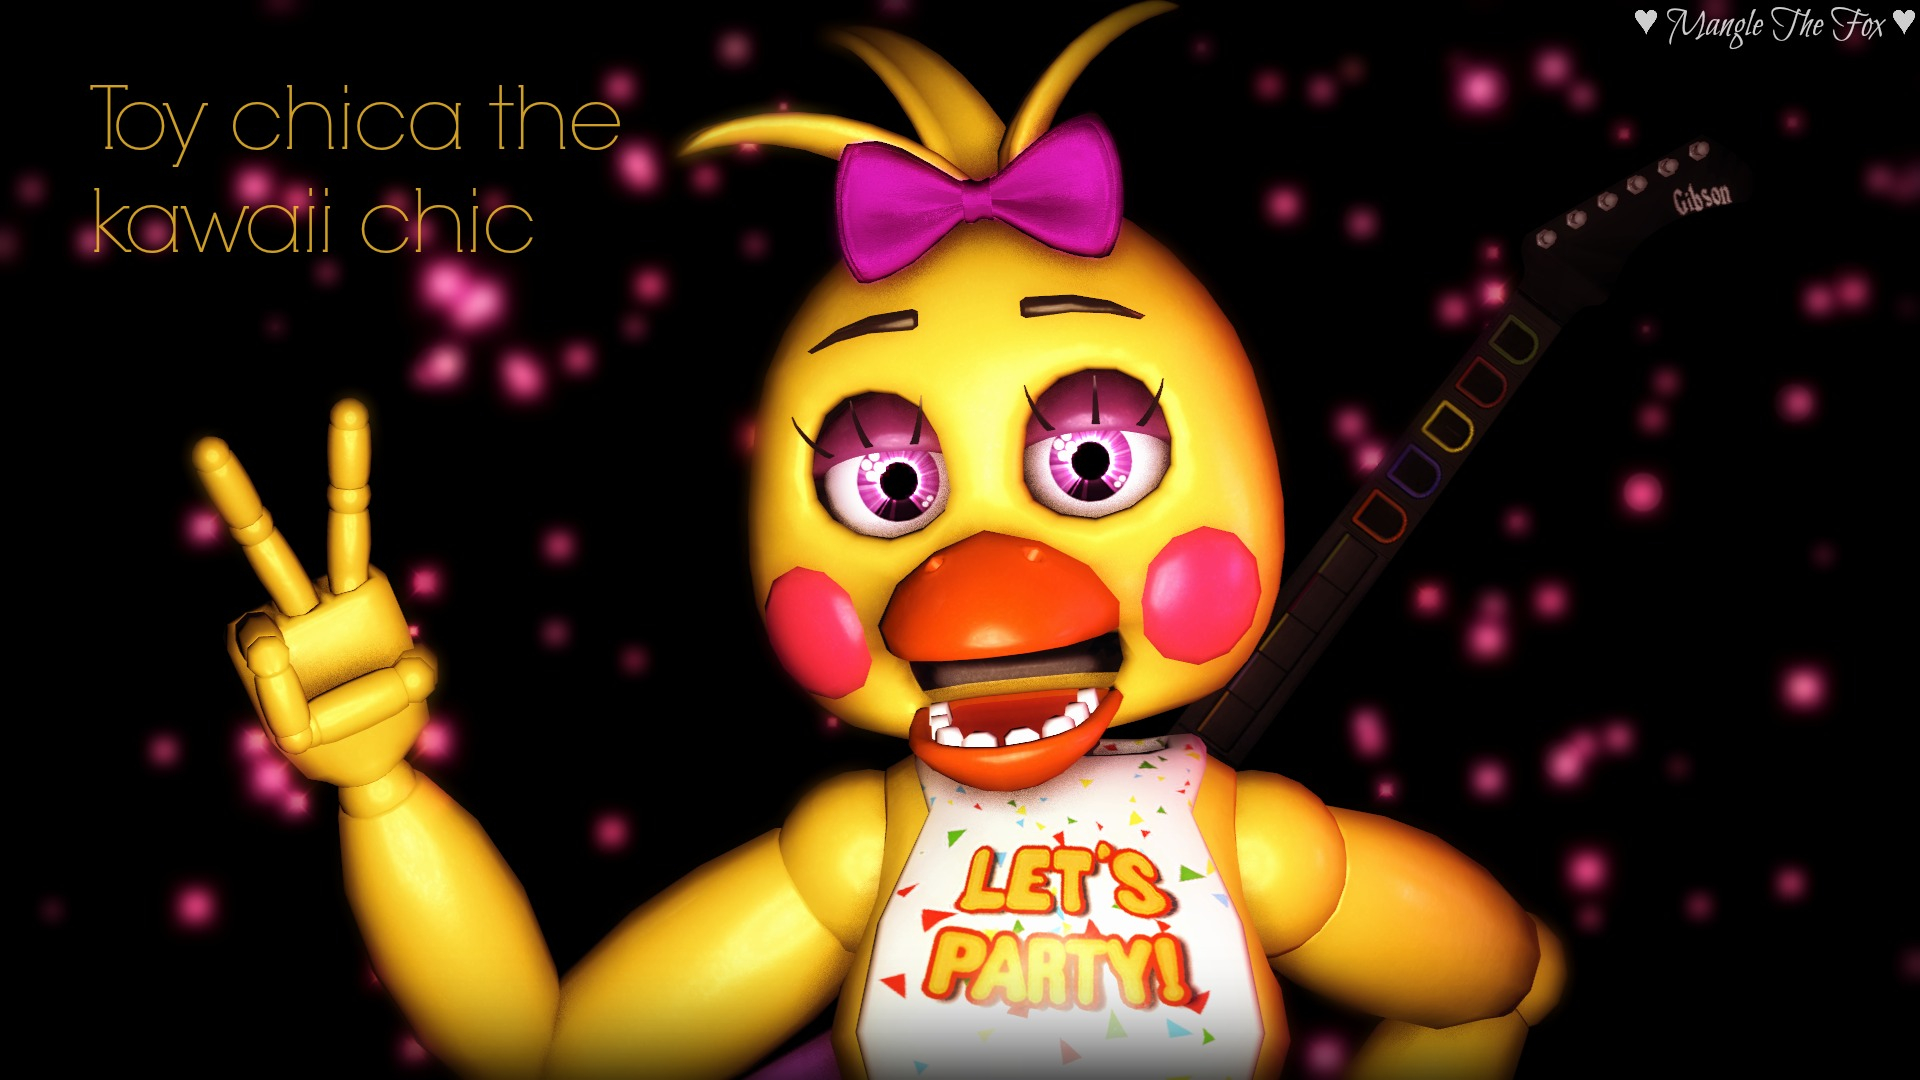 1920x1080 For Toy chica the kawai chic Five Nights at Freddy's Photo (40891788) Fanpop